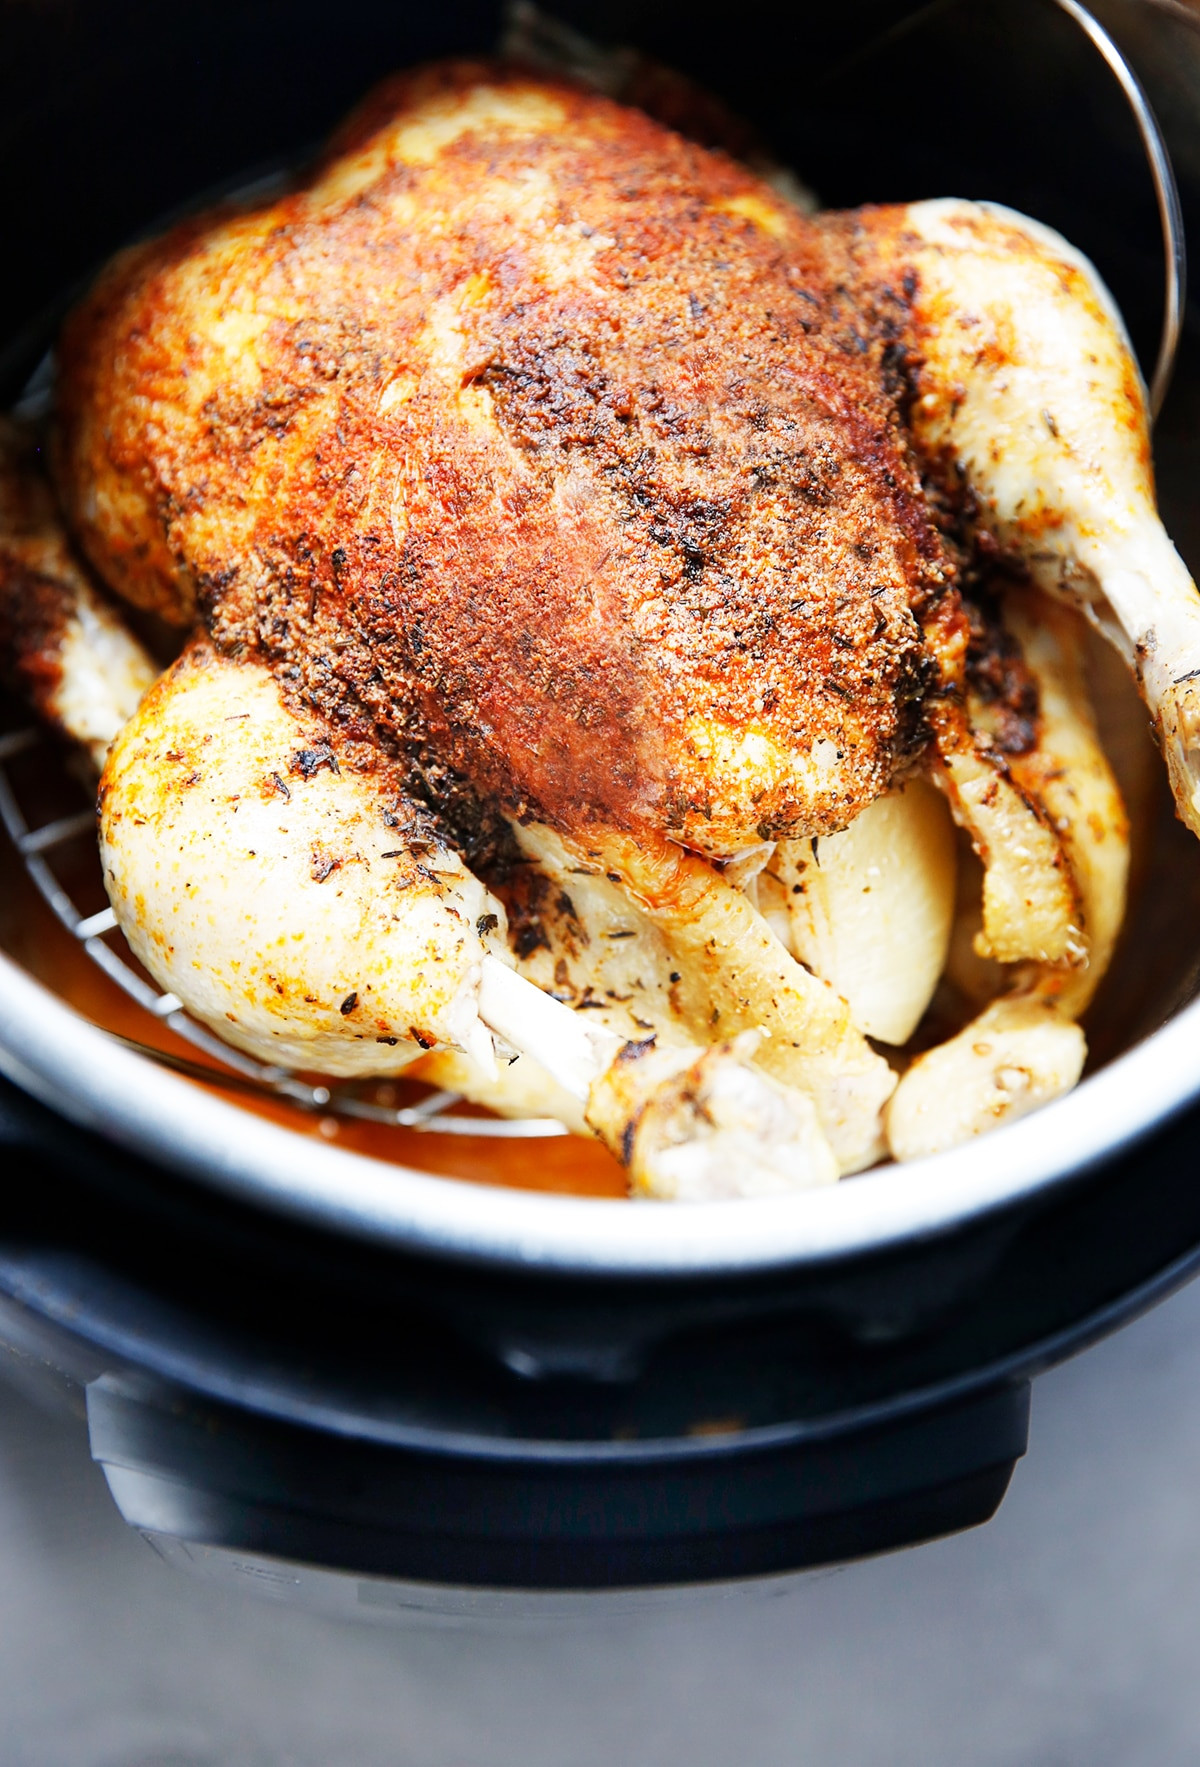 Cooking A Whole Chicken In The Instant Pot
 How to Cook a Whole Chicken in the Instant Pot Lexi s